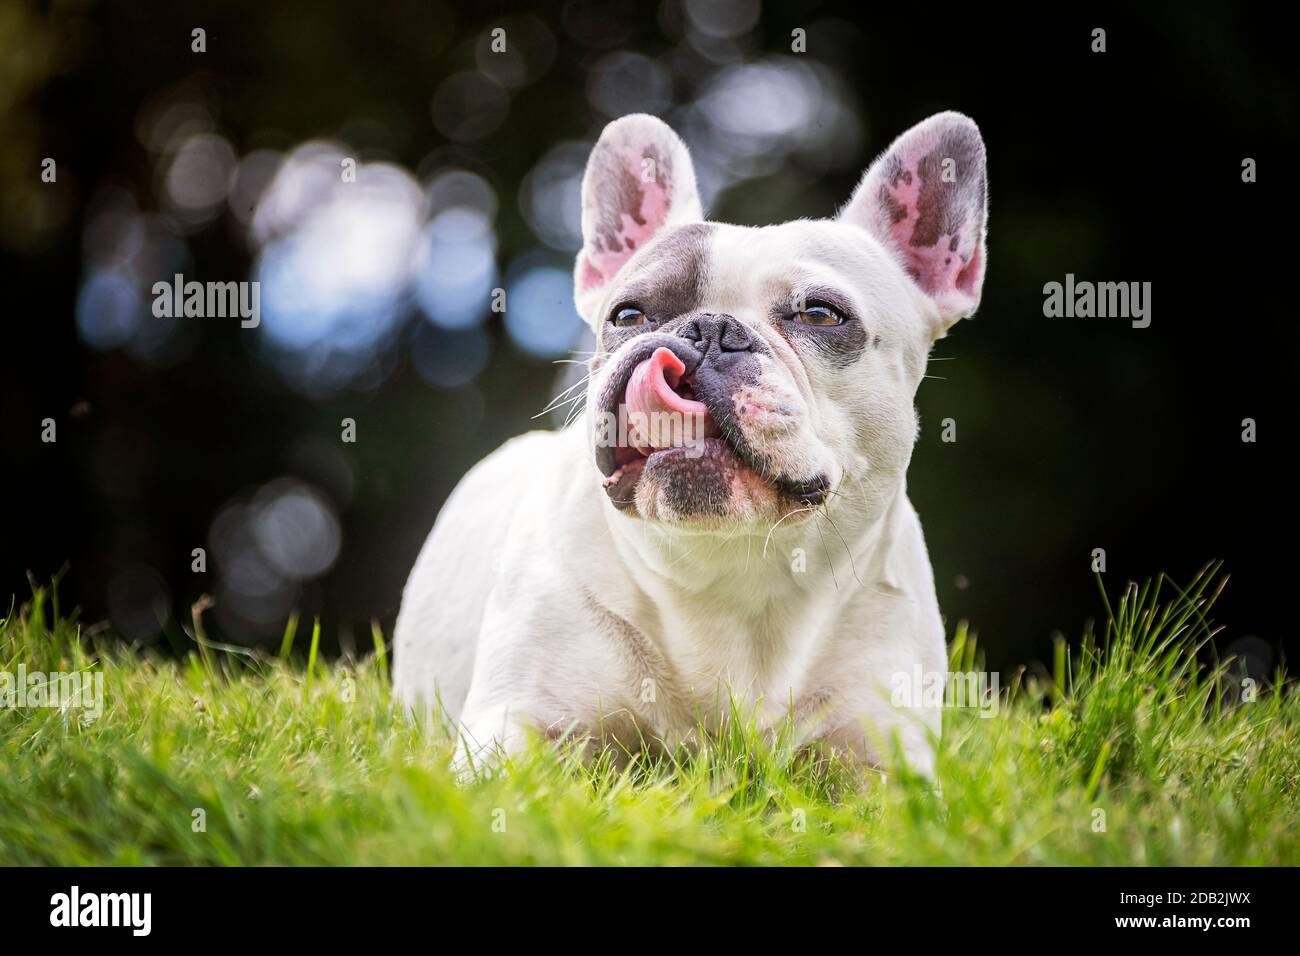 French Bulldog. Adult dog lying in grass, licking its nose. Germany Stock Photo